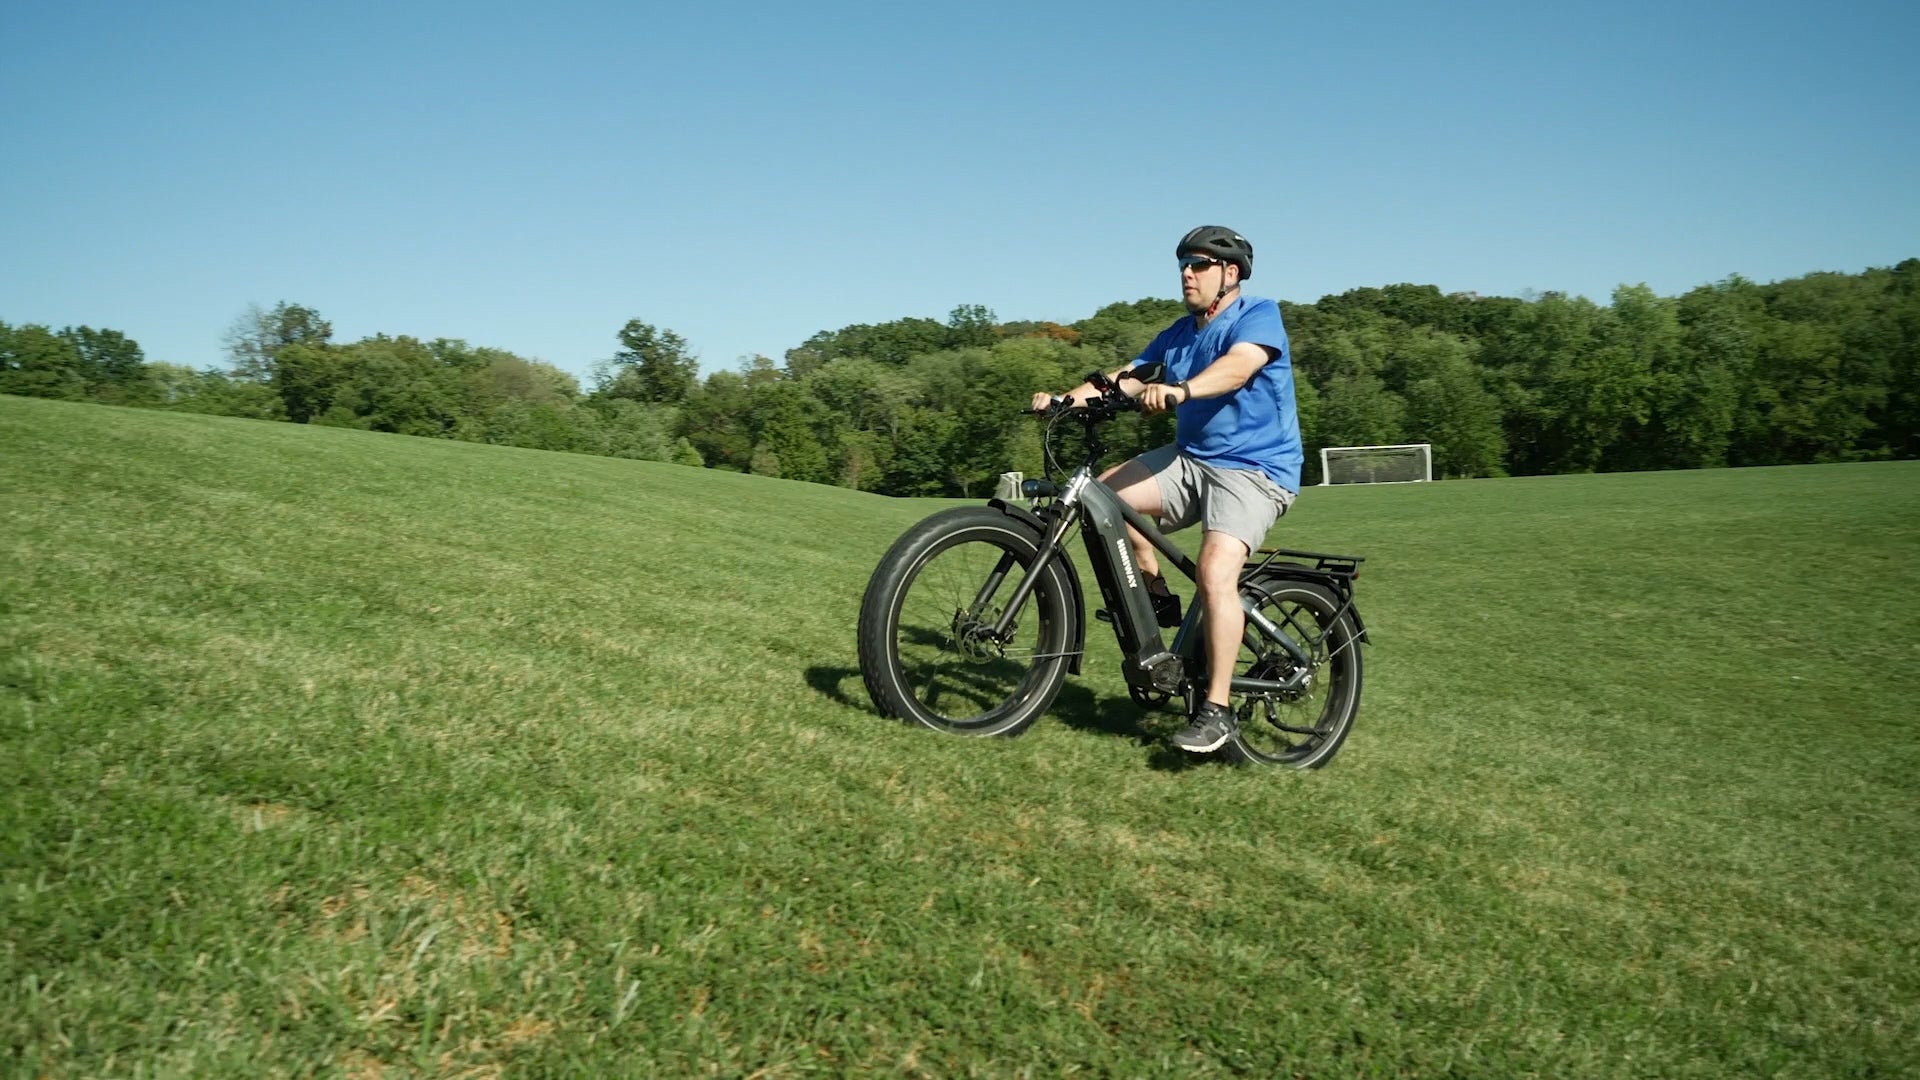 Himiway Stories | Riding ebike to help recovery